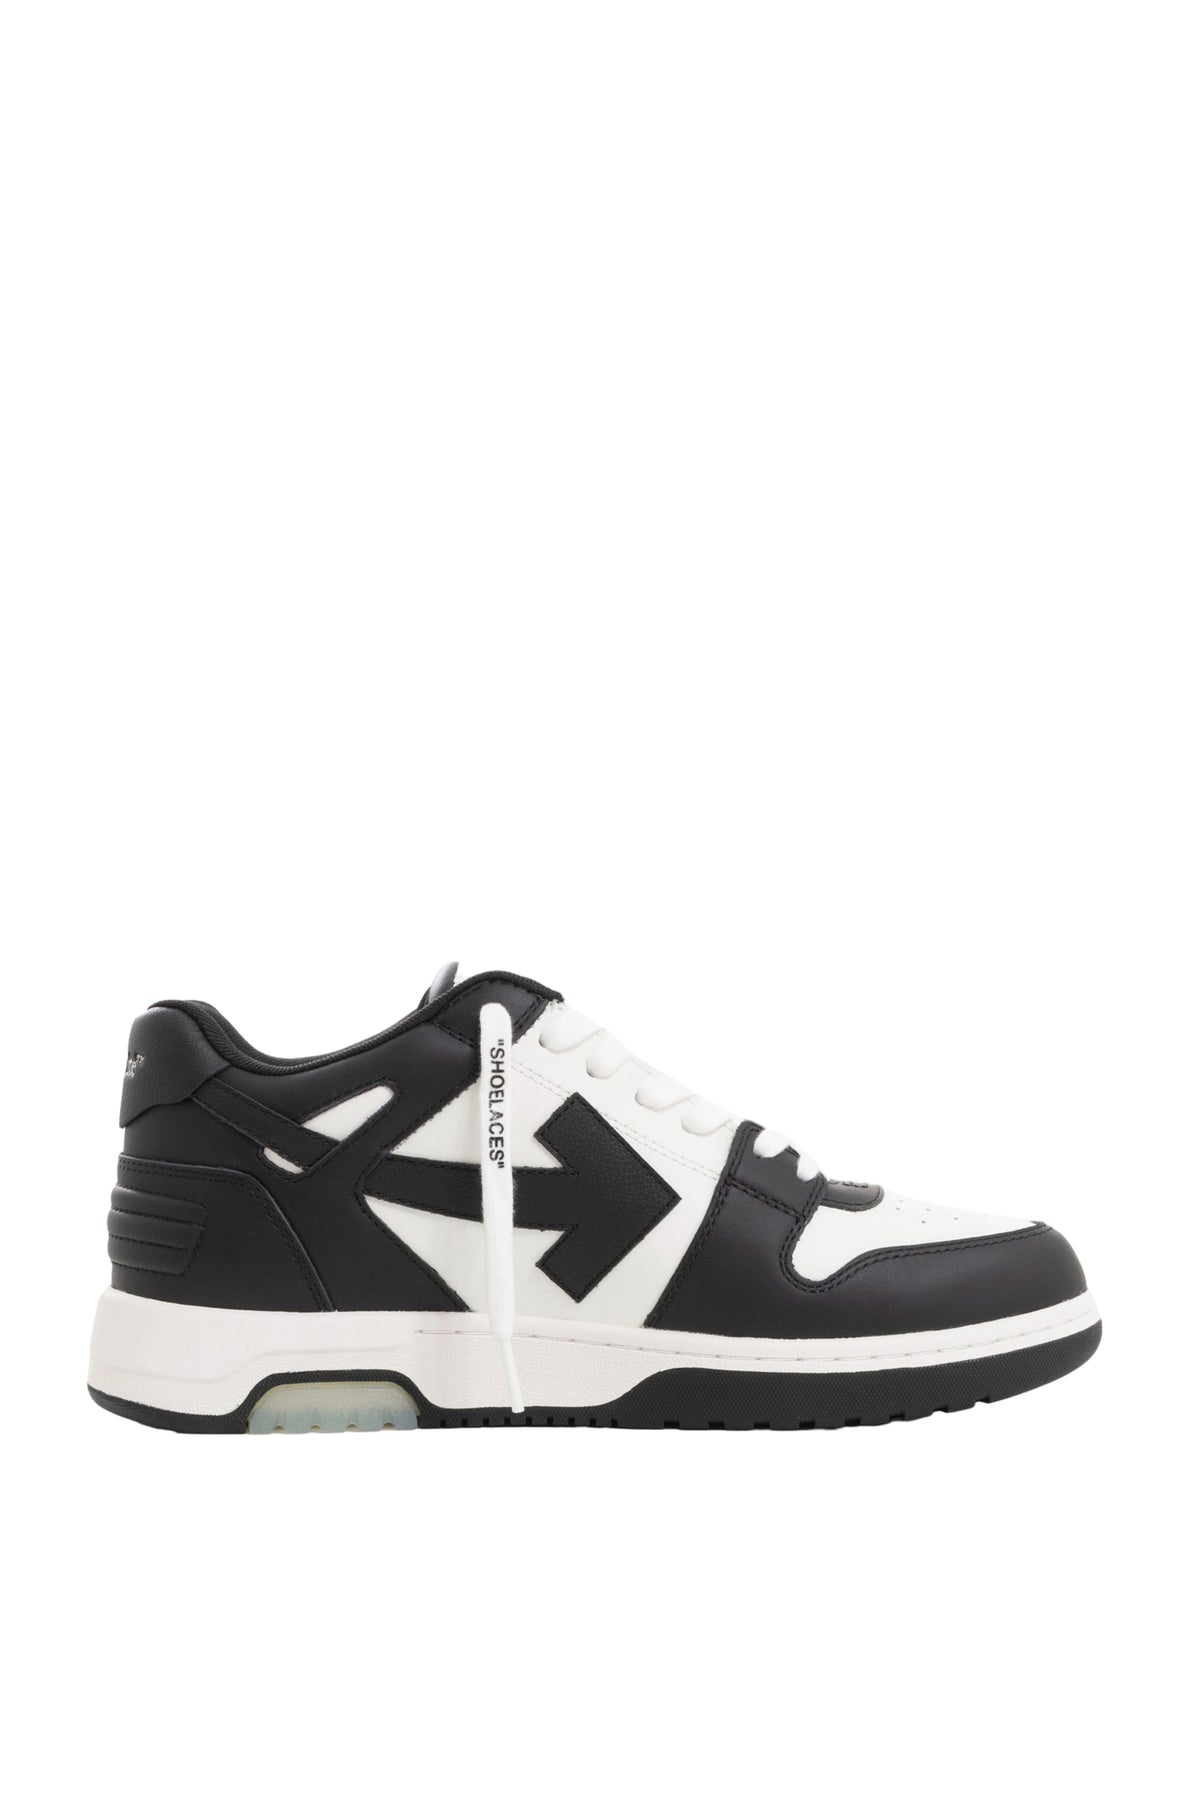 OUT OFF OFFICE CALF LEATHER / WHT BLK